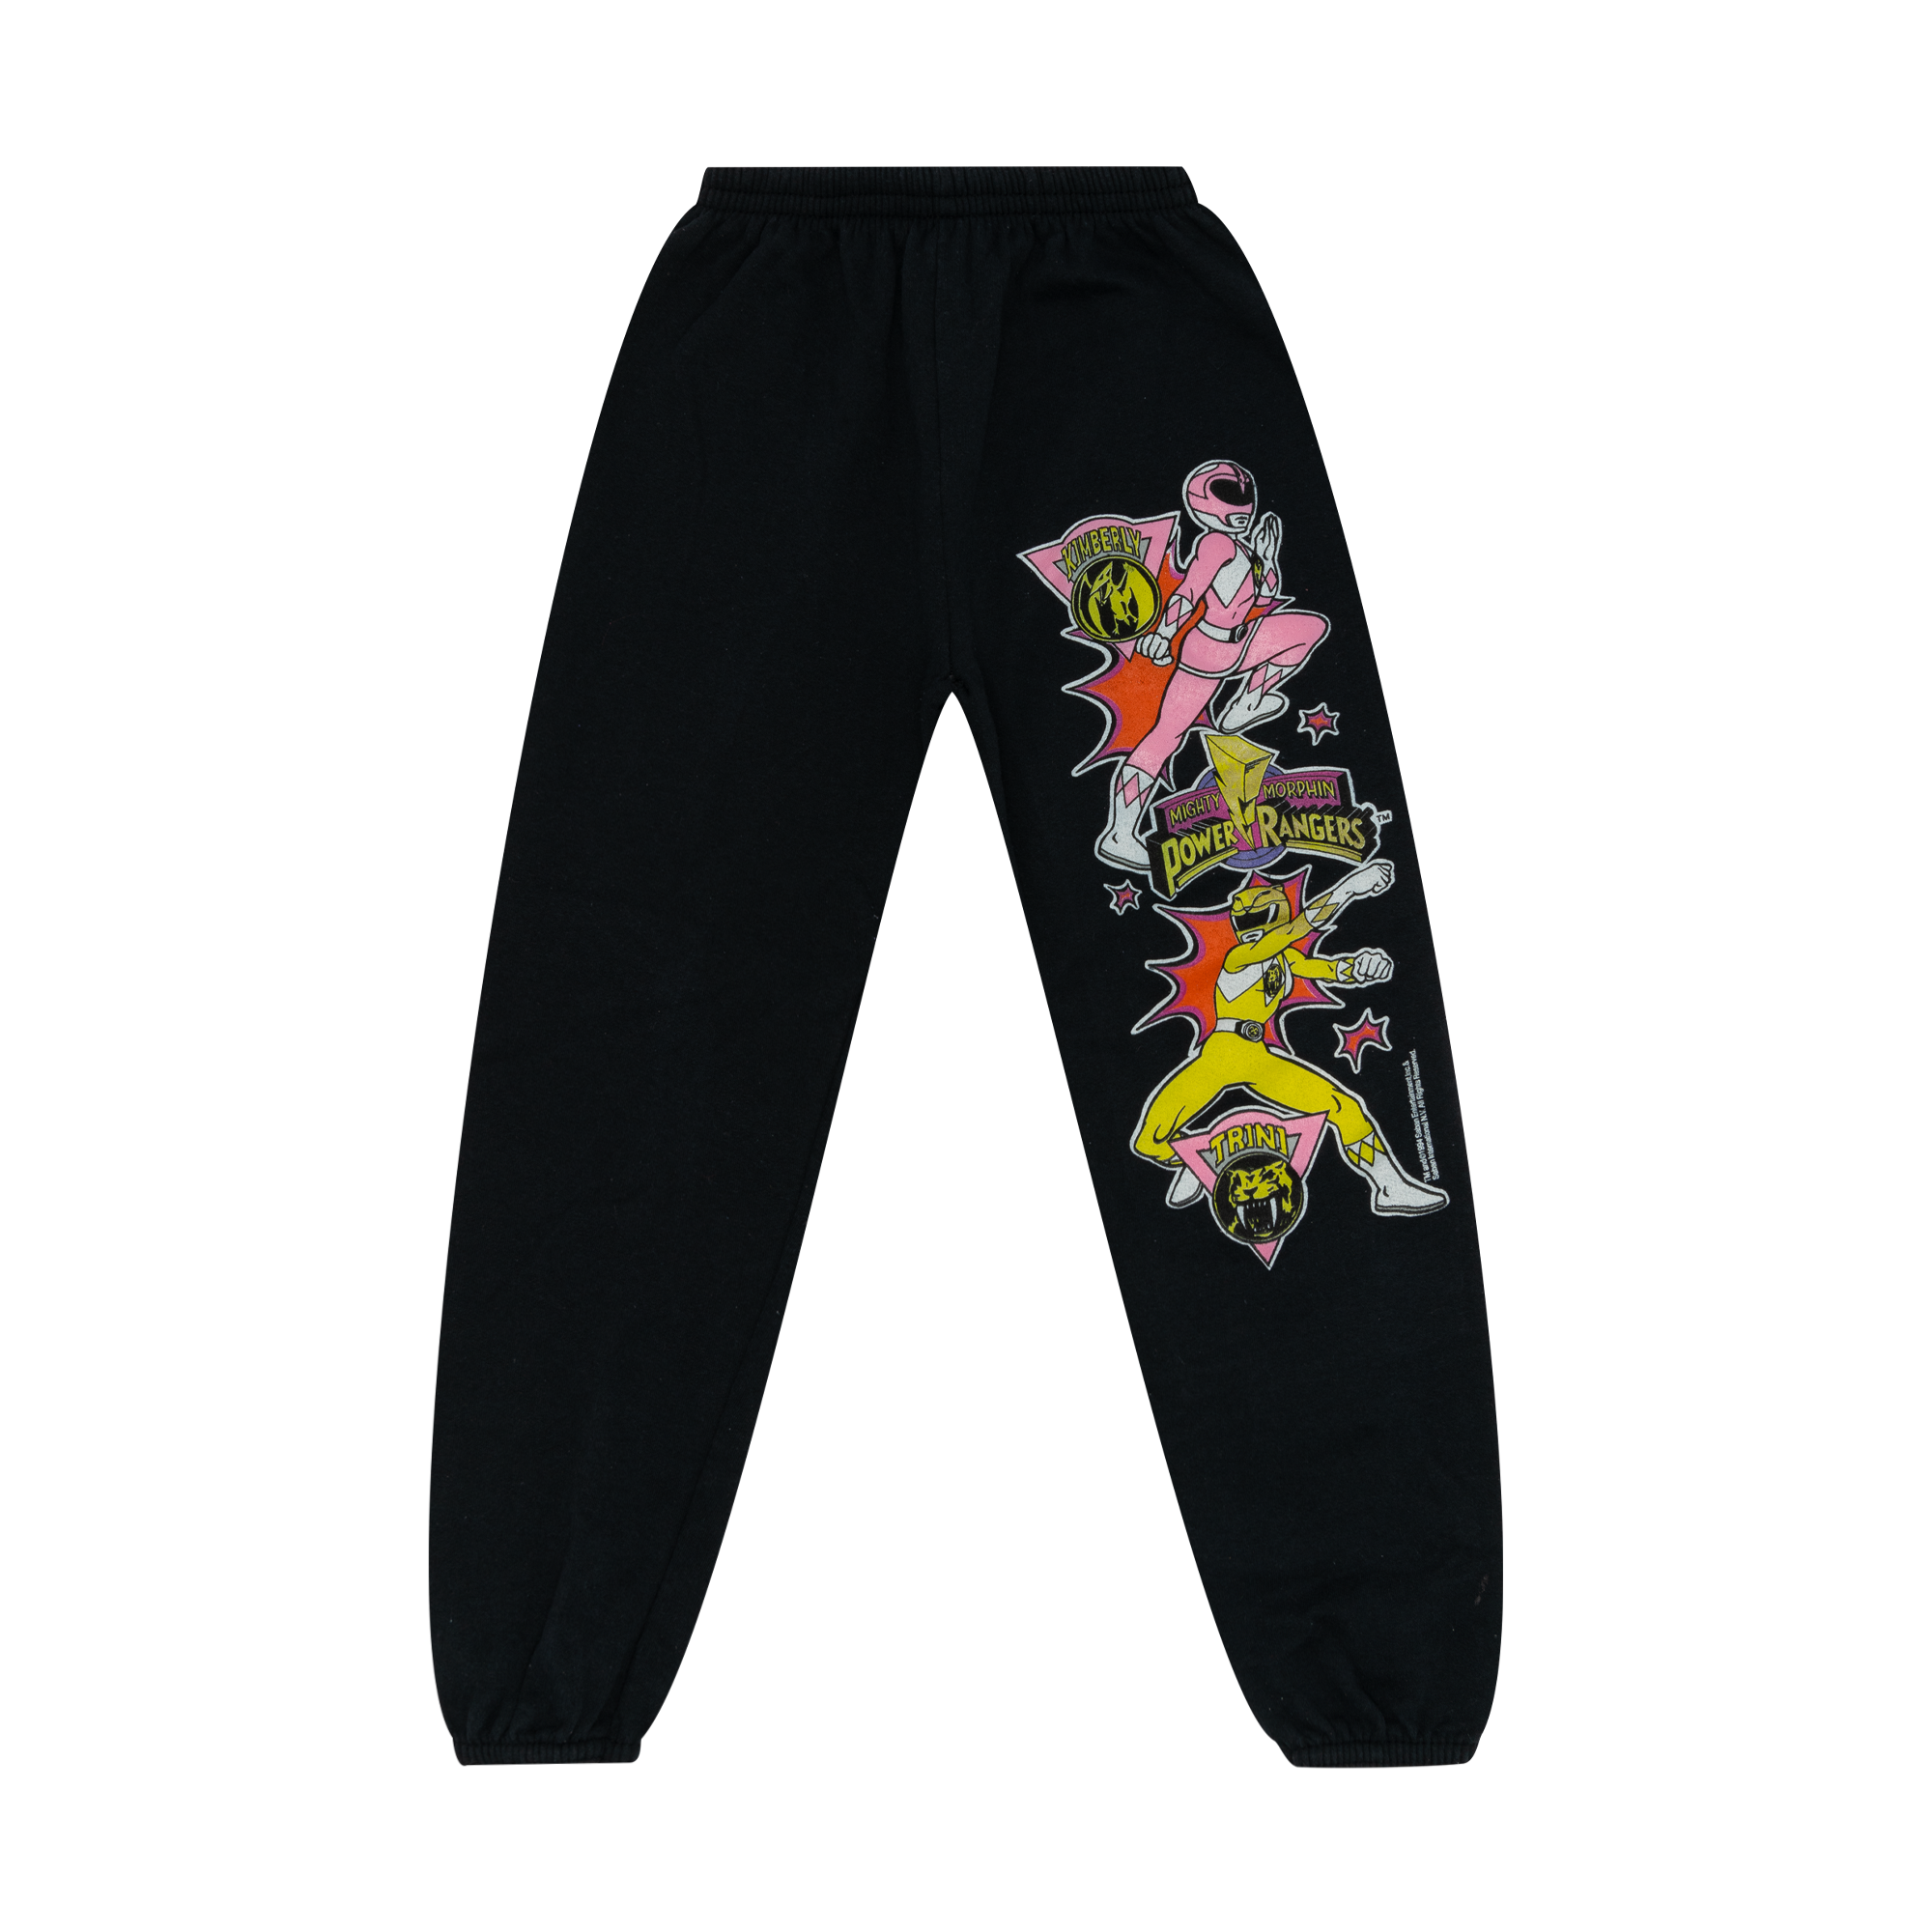 Mighty Morphin Power Rangers 1994 Youth Sweatpant Black-PLUS